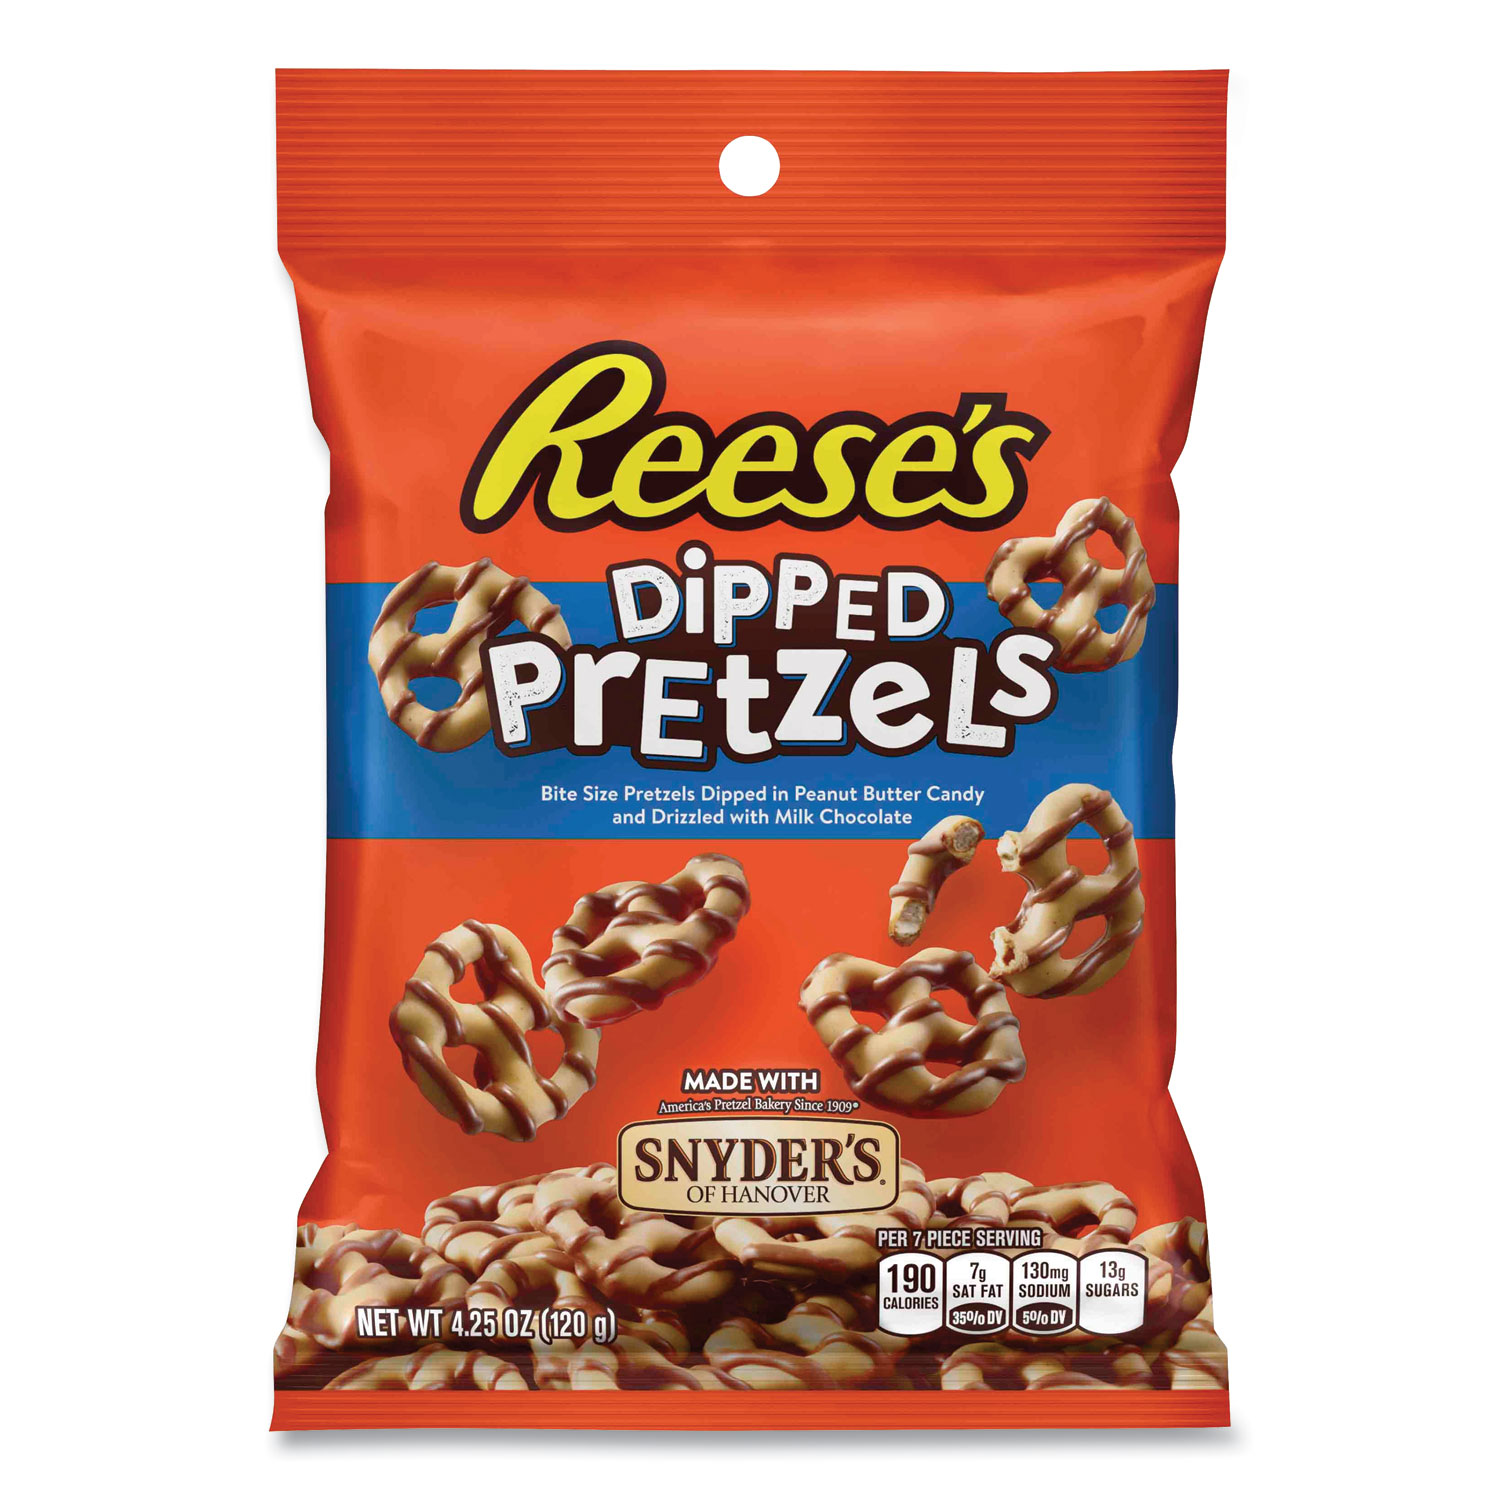  Reese's 21461 Dipped Pretzels, 4.25 oz Bag, Free Delivery in 1-4 Business Days (GRR24600288) 